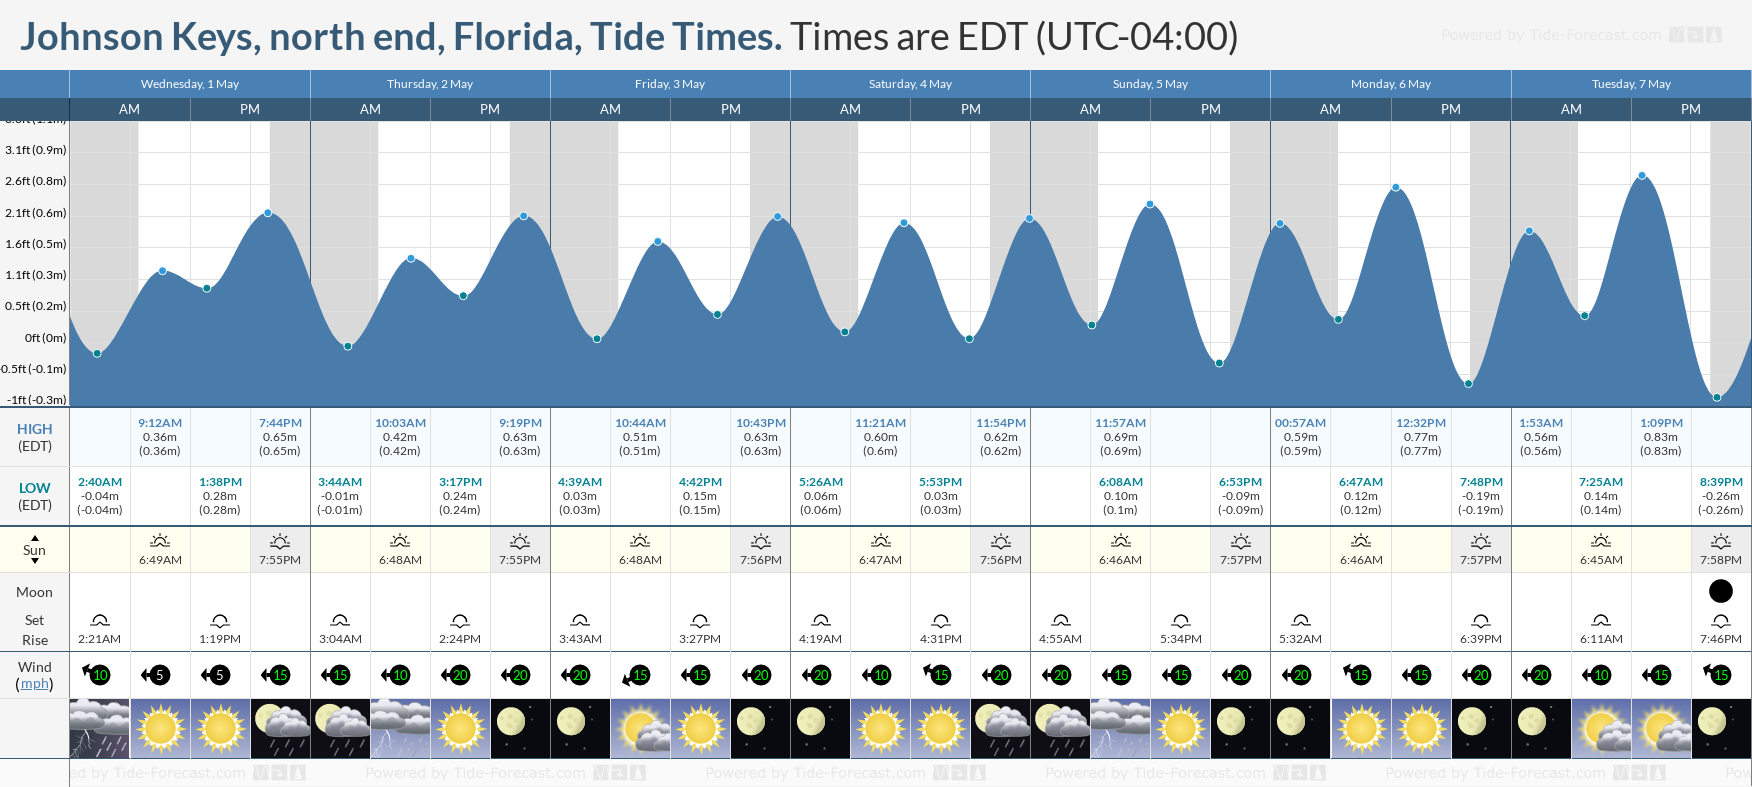 Johnson Keys, north end, Florida Tide Chart including high and low tide tide times for the next 7 days